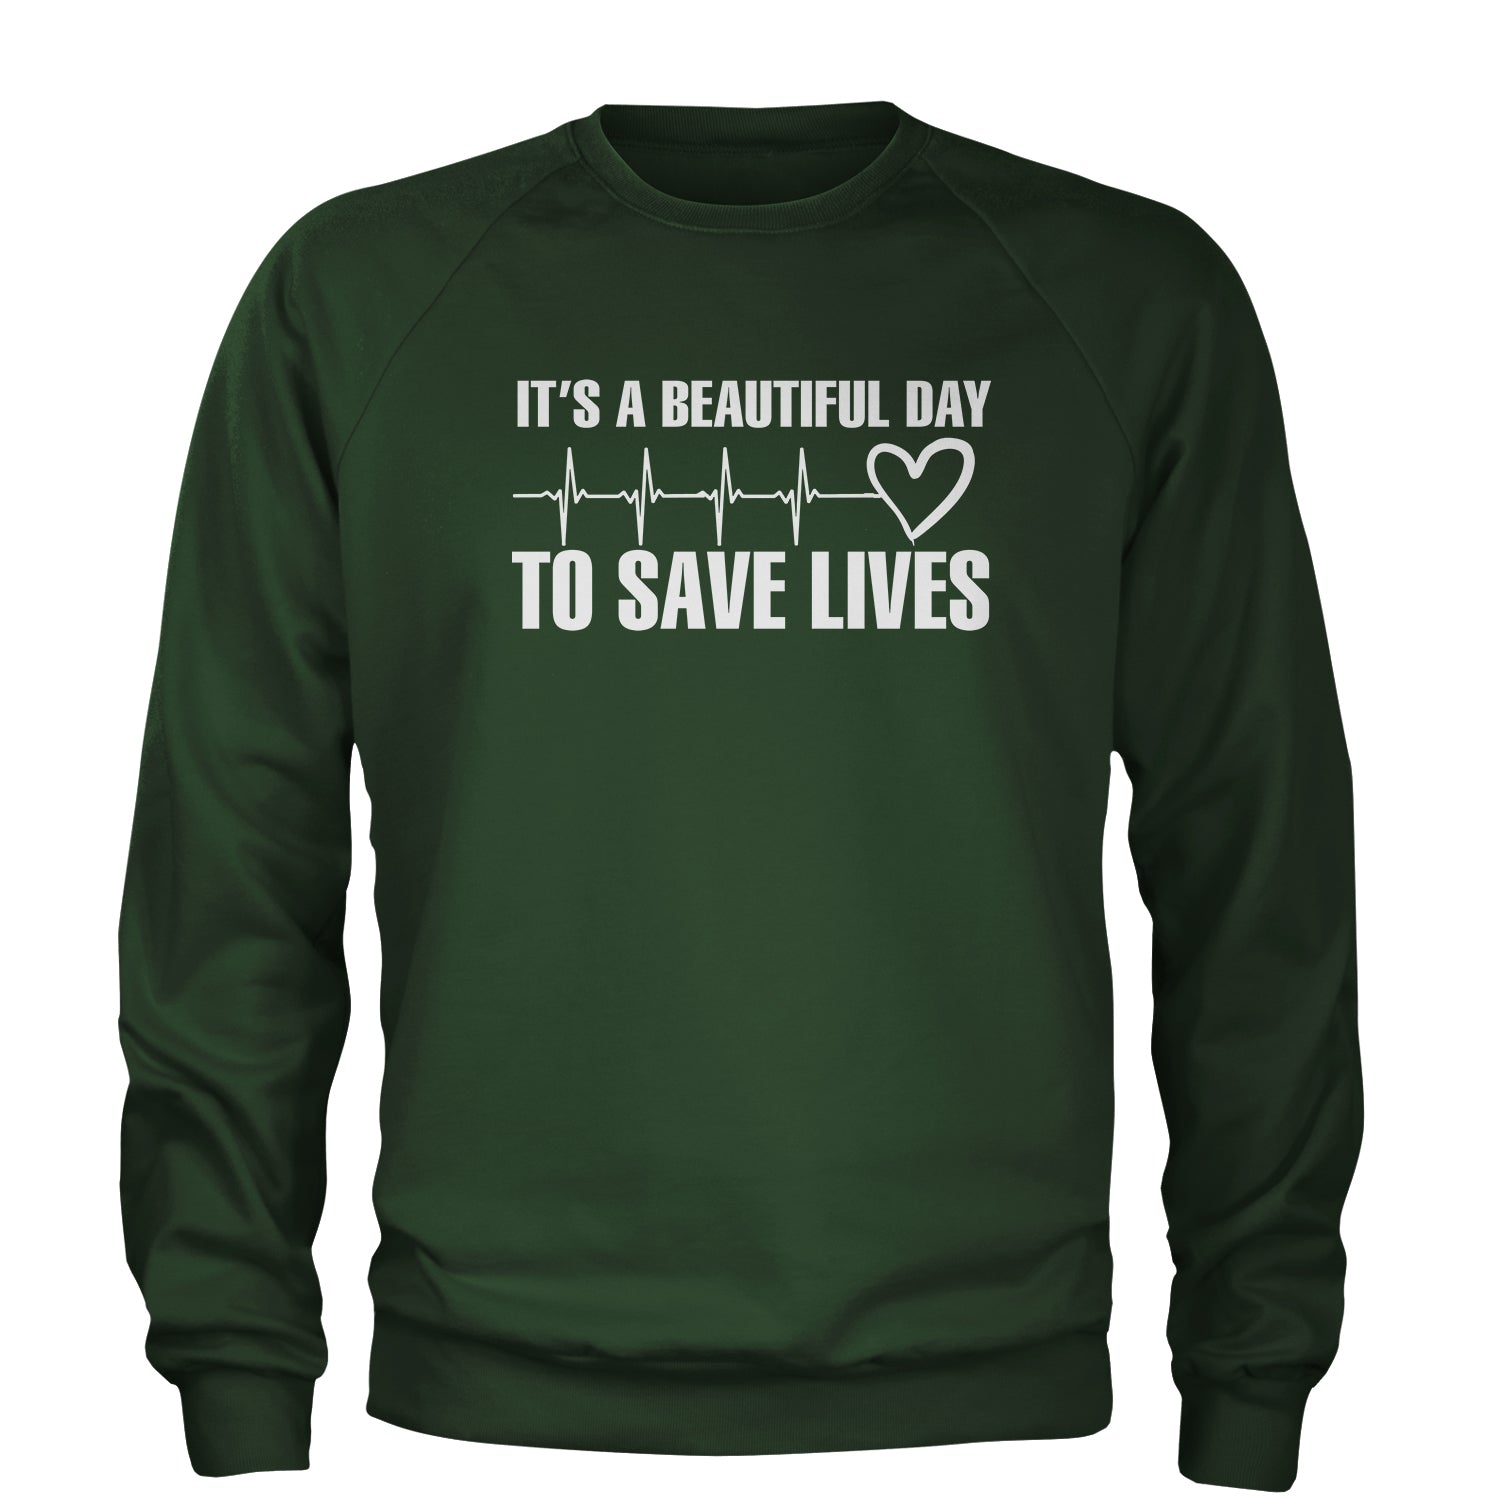 It's A Beautiful Day To Save Lives (White Print) Adult Crewneck Sweatshirt #expressiontees by Expression Tees